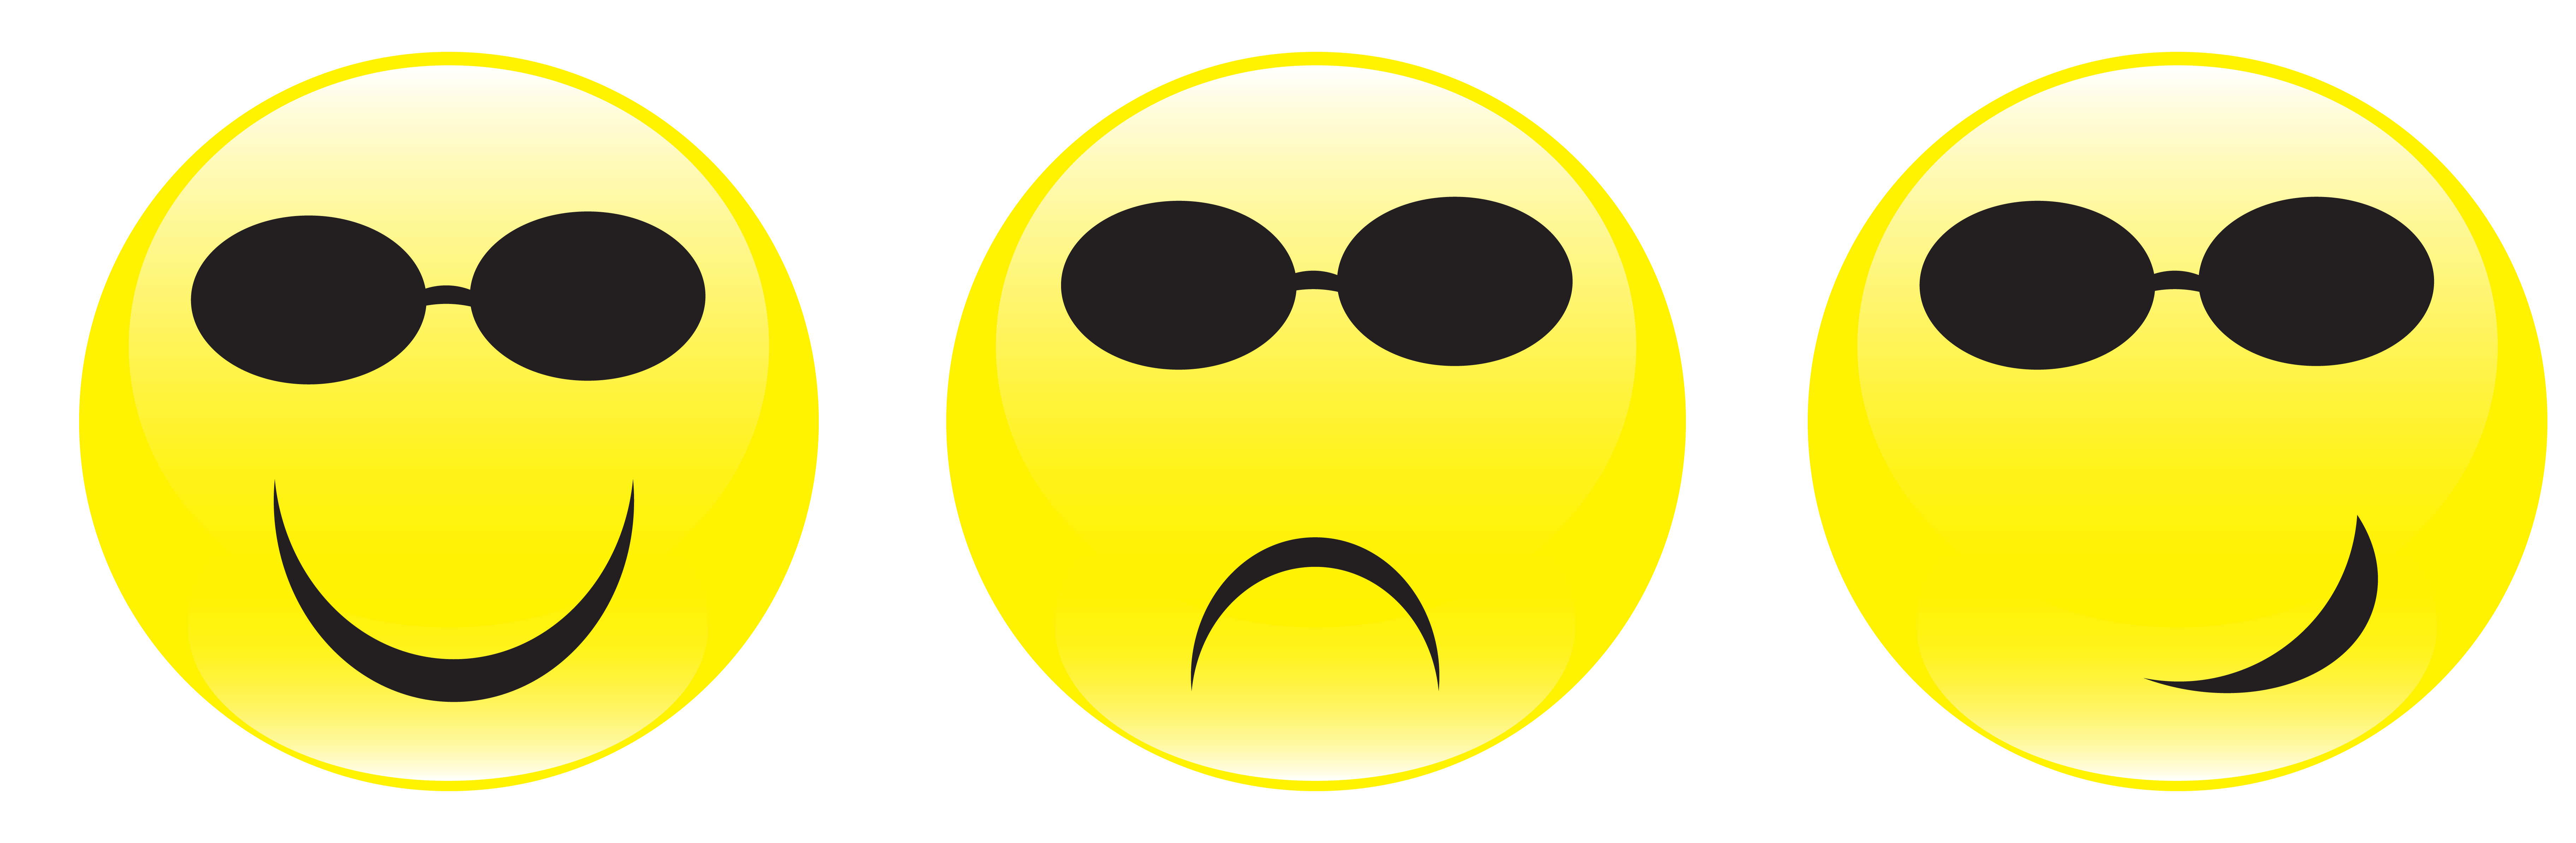 Smiley Face And Sad Face - ClipArt Best